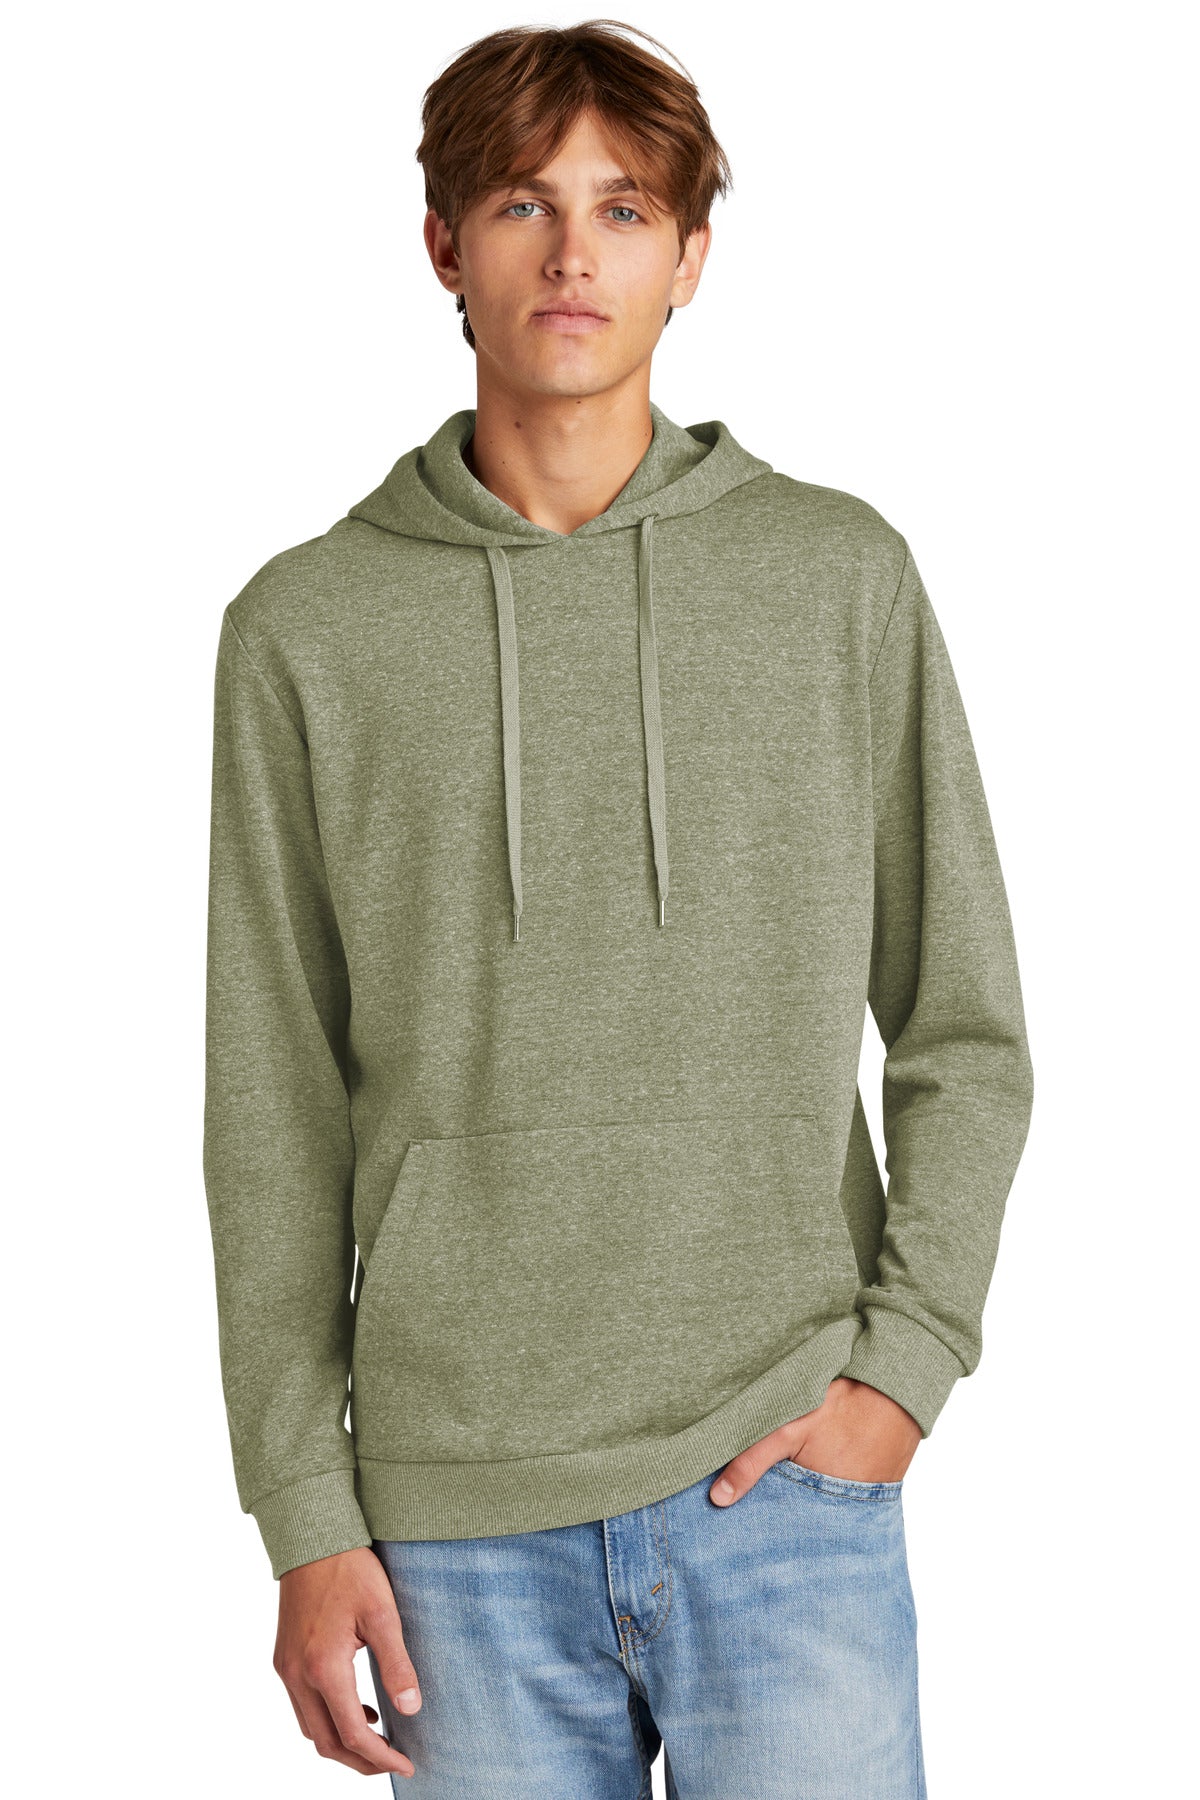 District® Perfect Tri® Fleece Pullover Hoodie DT1300